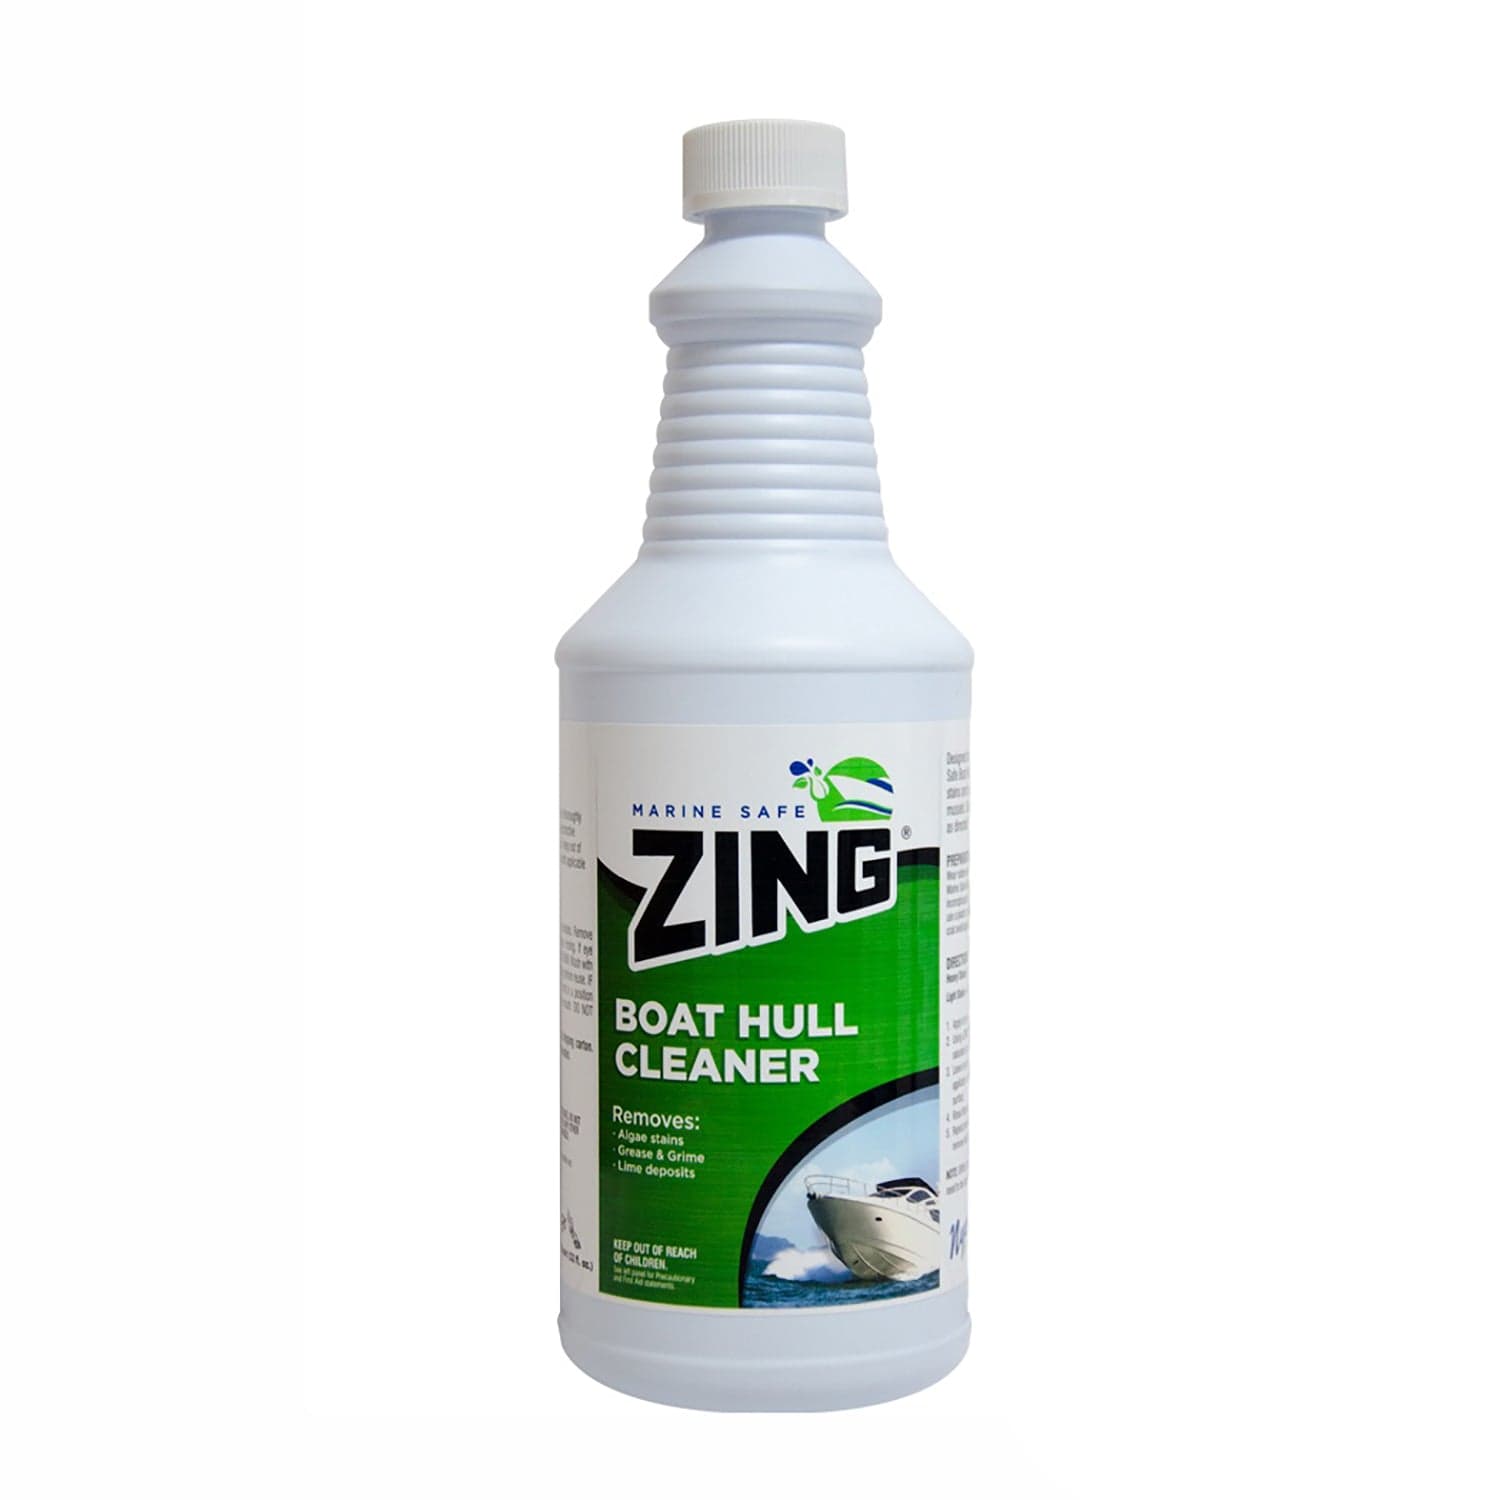 Zing Z904-Q12 Marine Safe Boat Hull Cleaner, Clear Green - 1 Quart